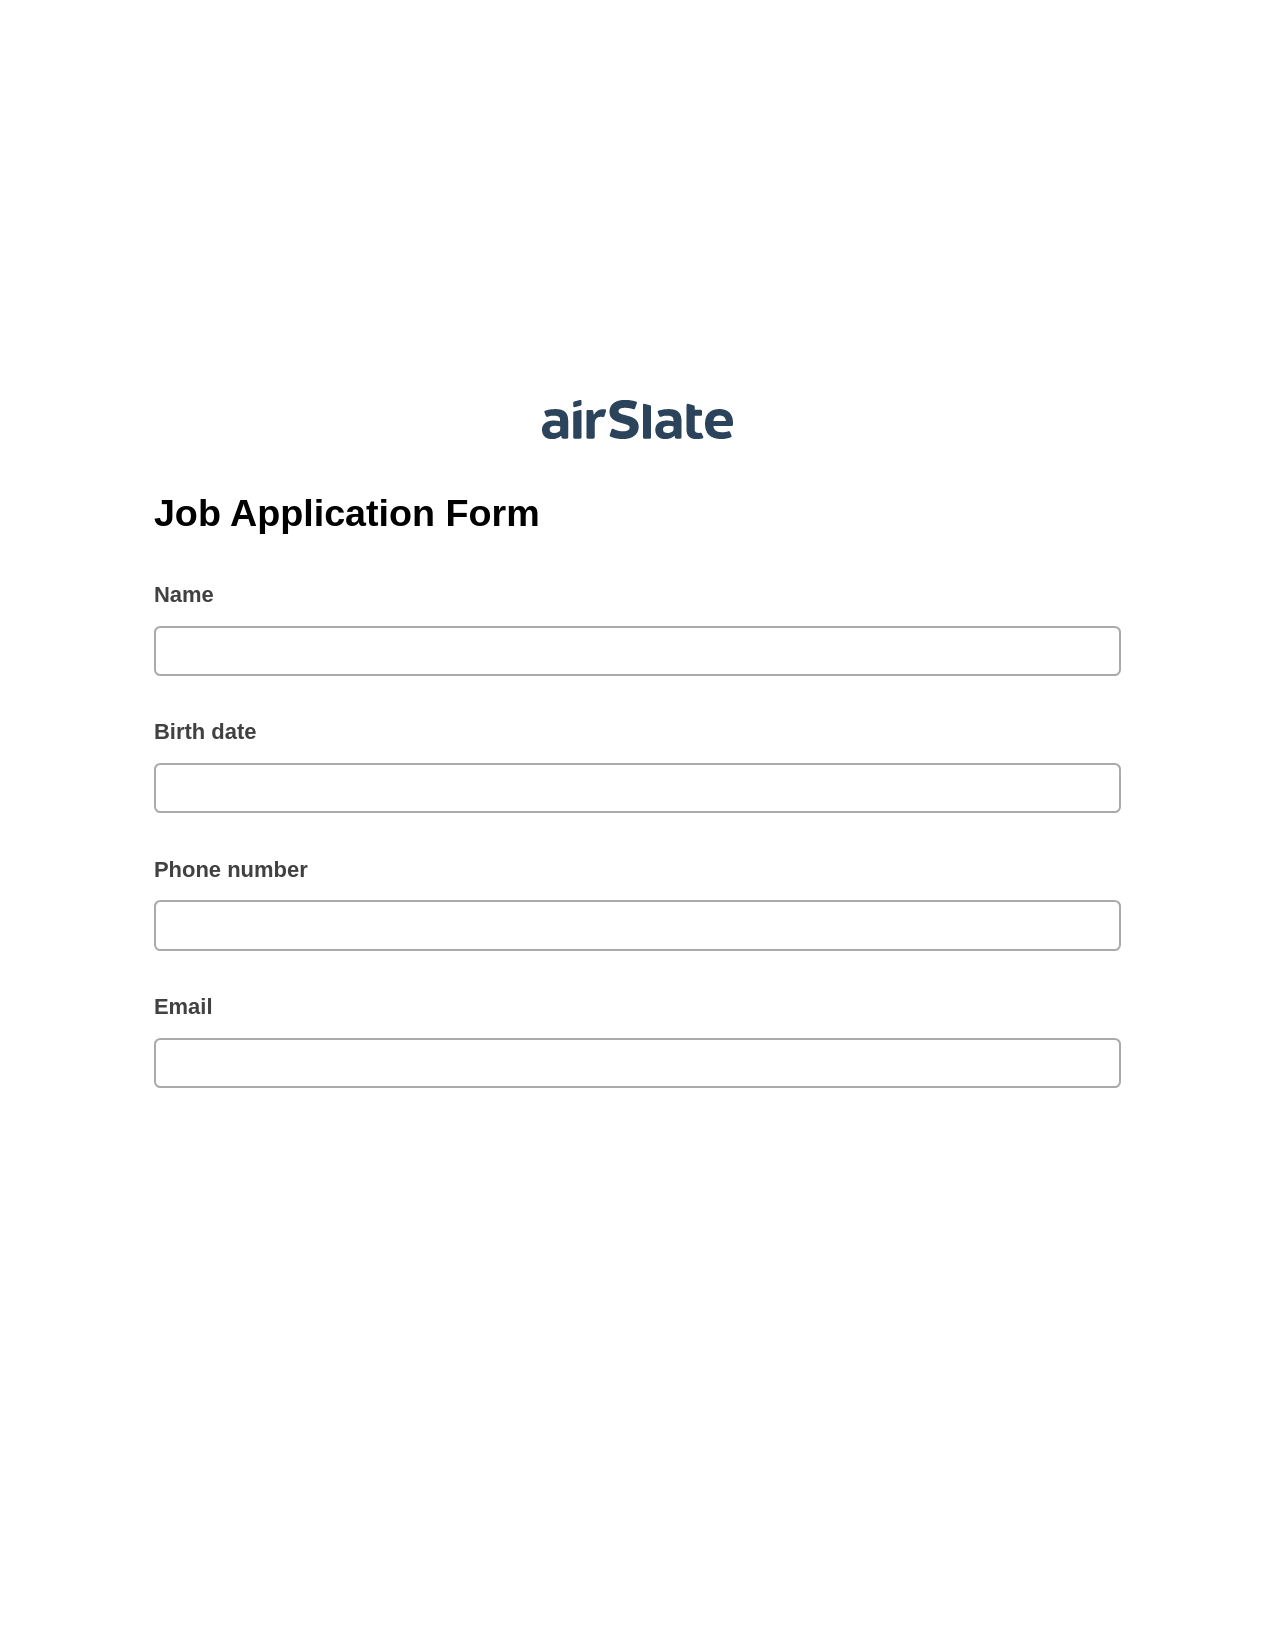 Job Application Form Pre-fill Dropdown from Airtable, Create Slate every Google Sheet Update Bot, Box Bot